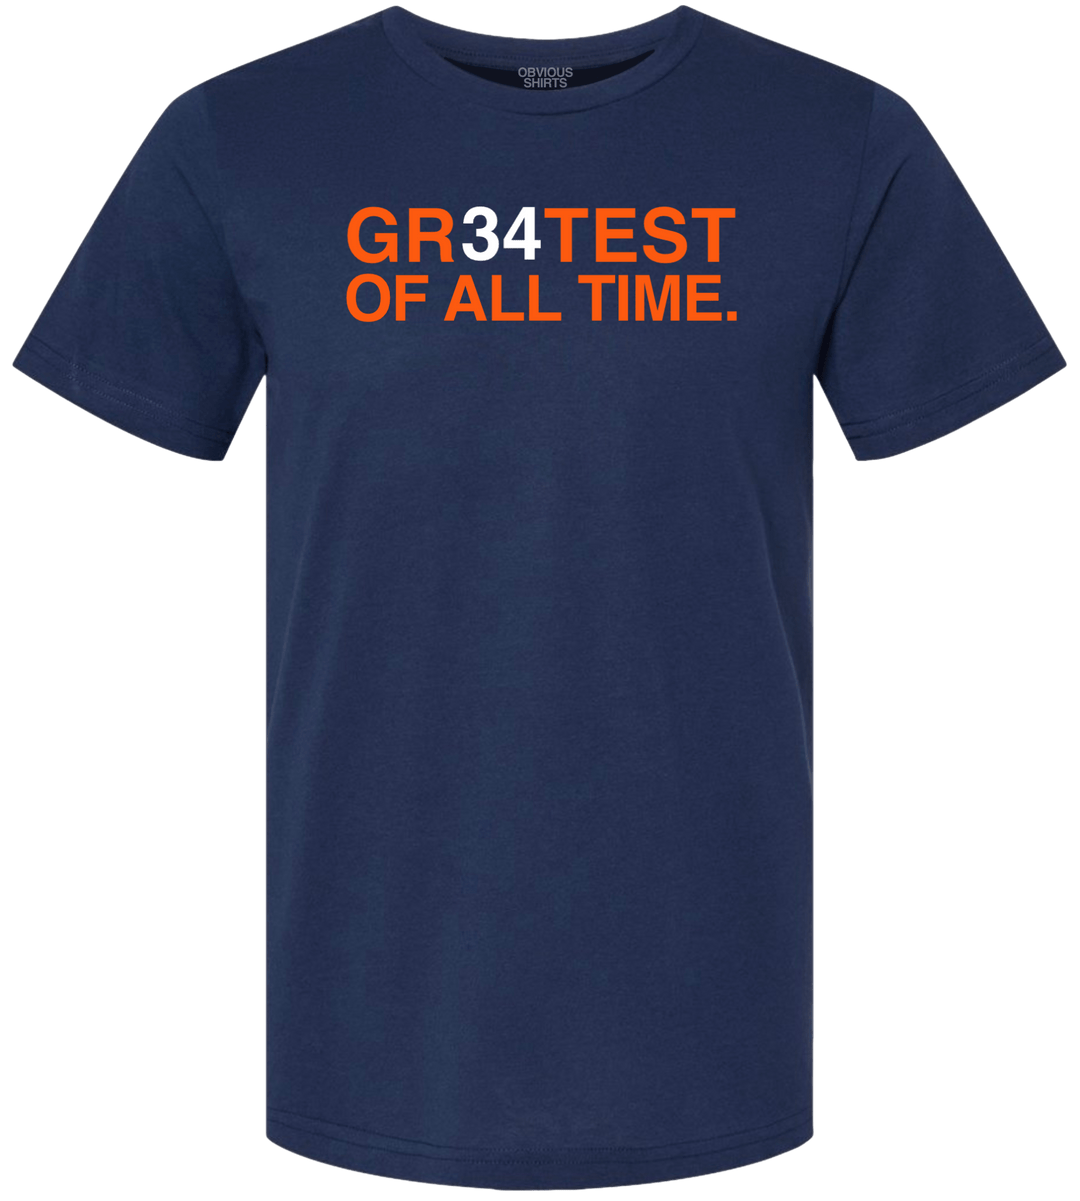 GR34TEST OF ALL TIME. - OBVIOUS SHIRTS